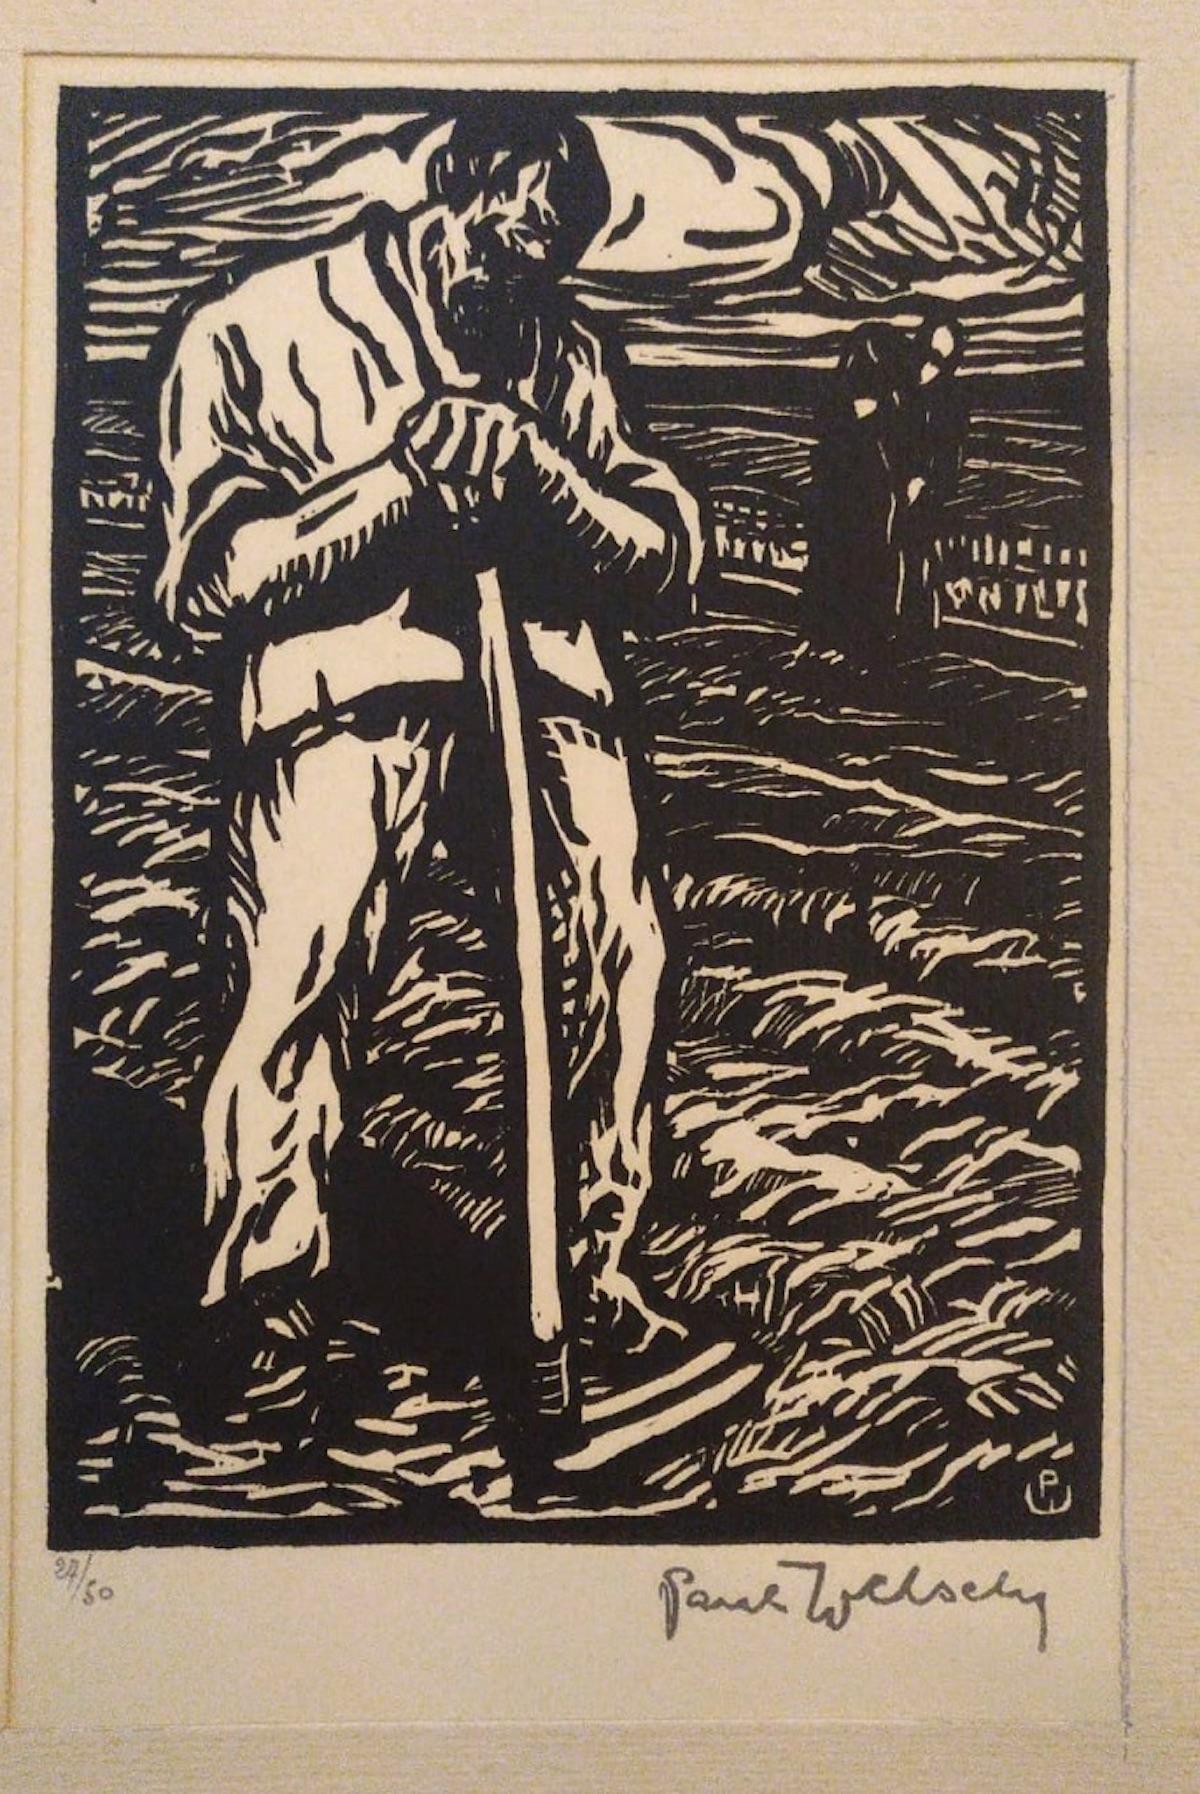 The Farmer is an original modern artwork realized in the middle of the XX Century by Paul Welsch (1889 - 1954).

Original xylograph on paper. Hand-signed by the artist on the lower right corner: Paul Welsch. Numbered in pencil on the lower left